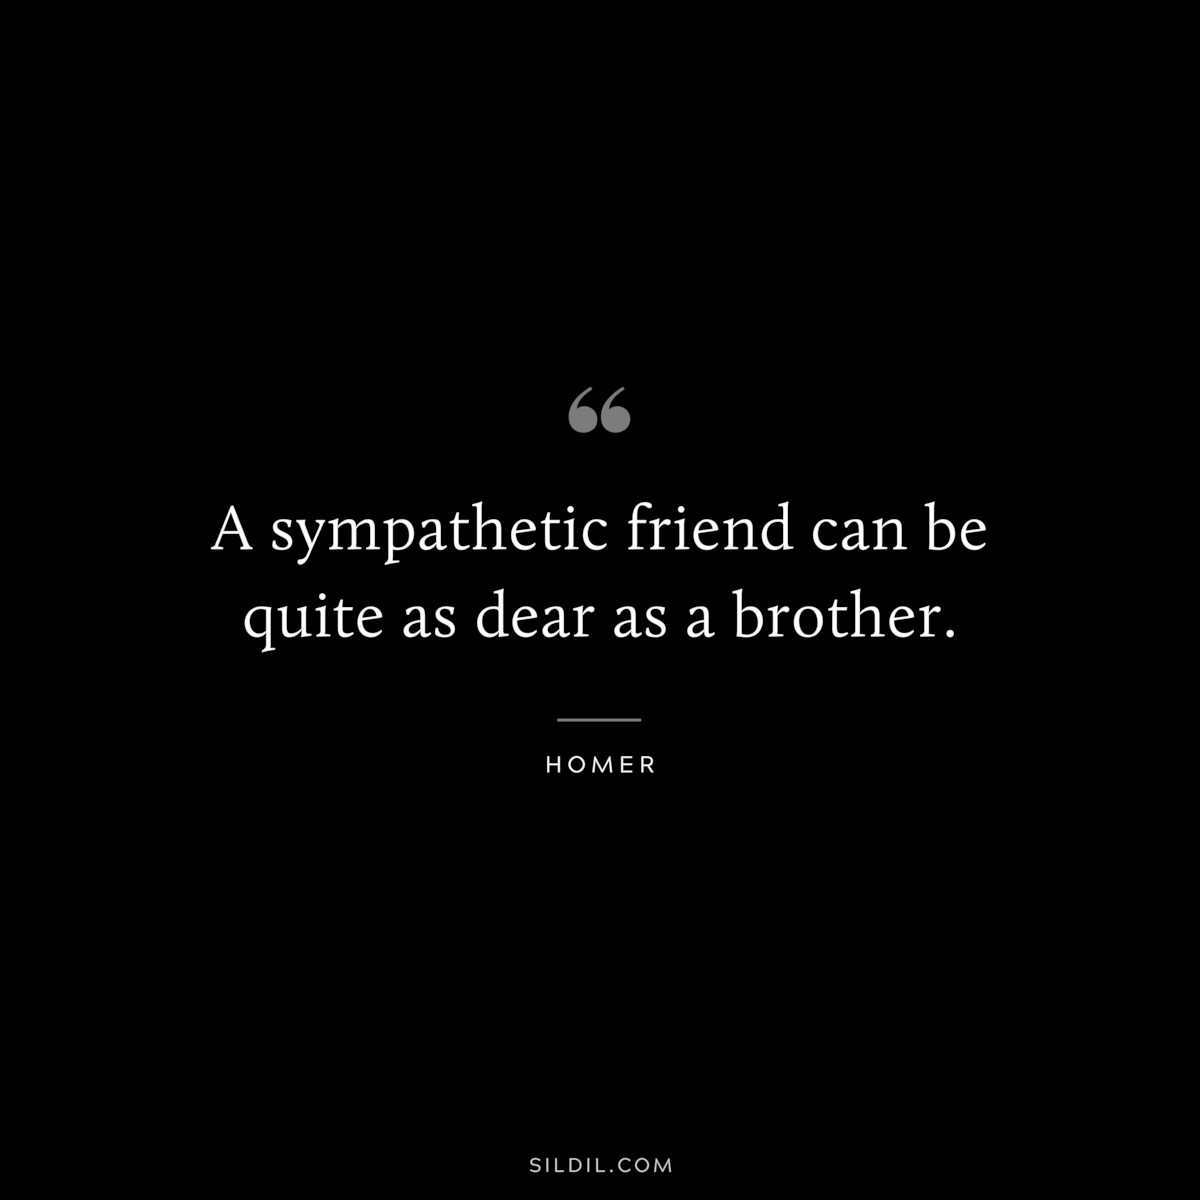 A sympathetic friend can be quite as dear as a brother. ― Homer